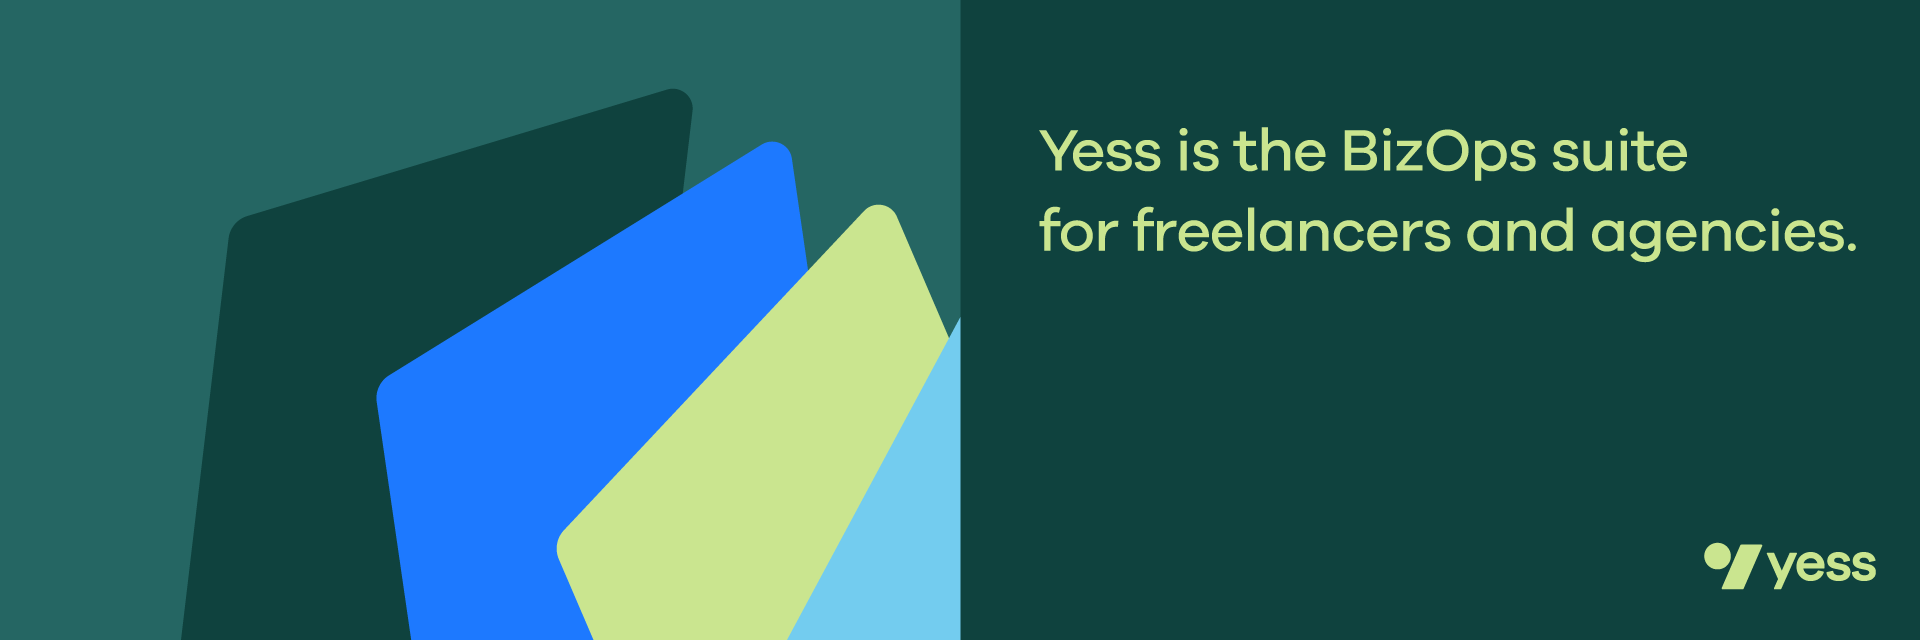 Yess is the BizOps suite for freelancers and agencies